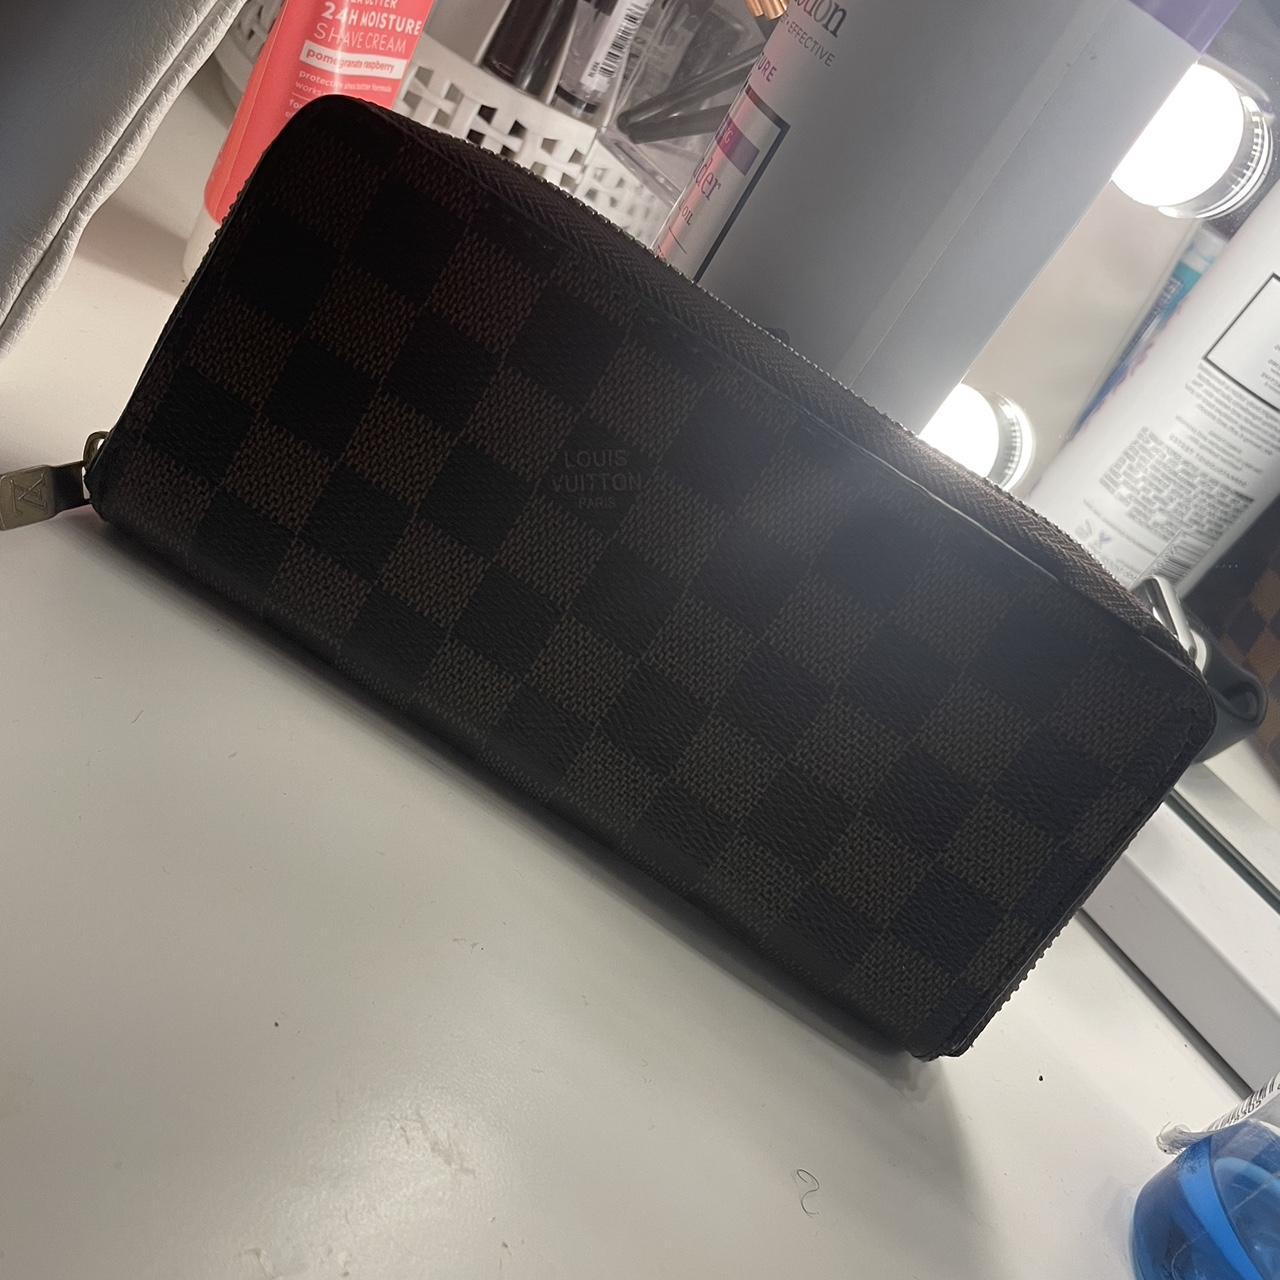 Real LV wallet Send offers!! It looks scratches - Depop